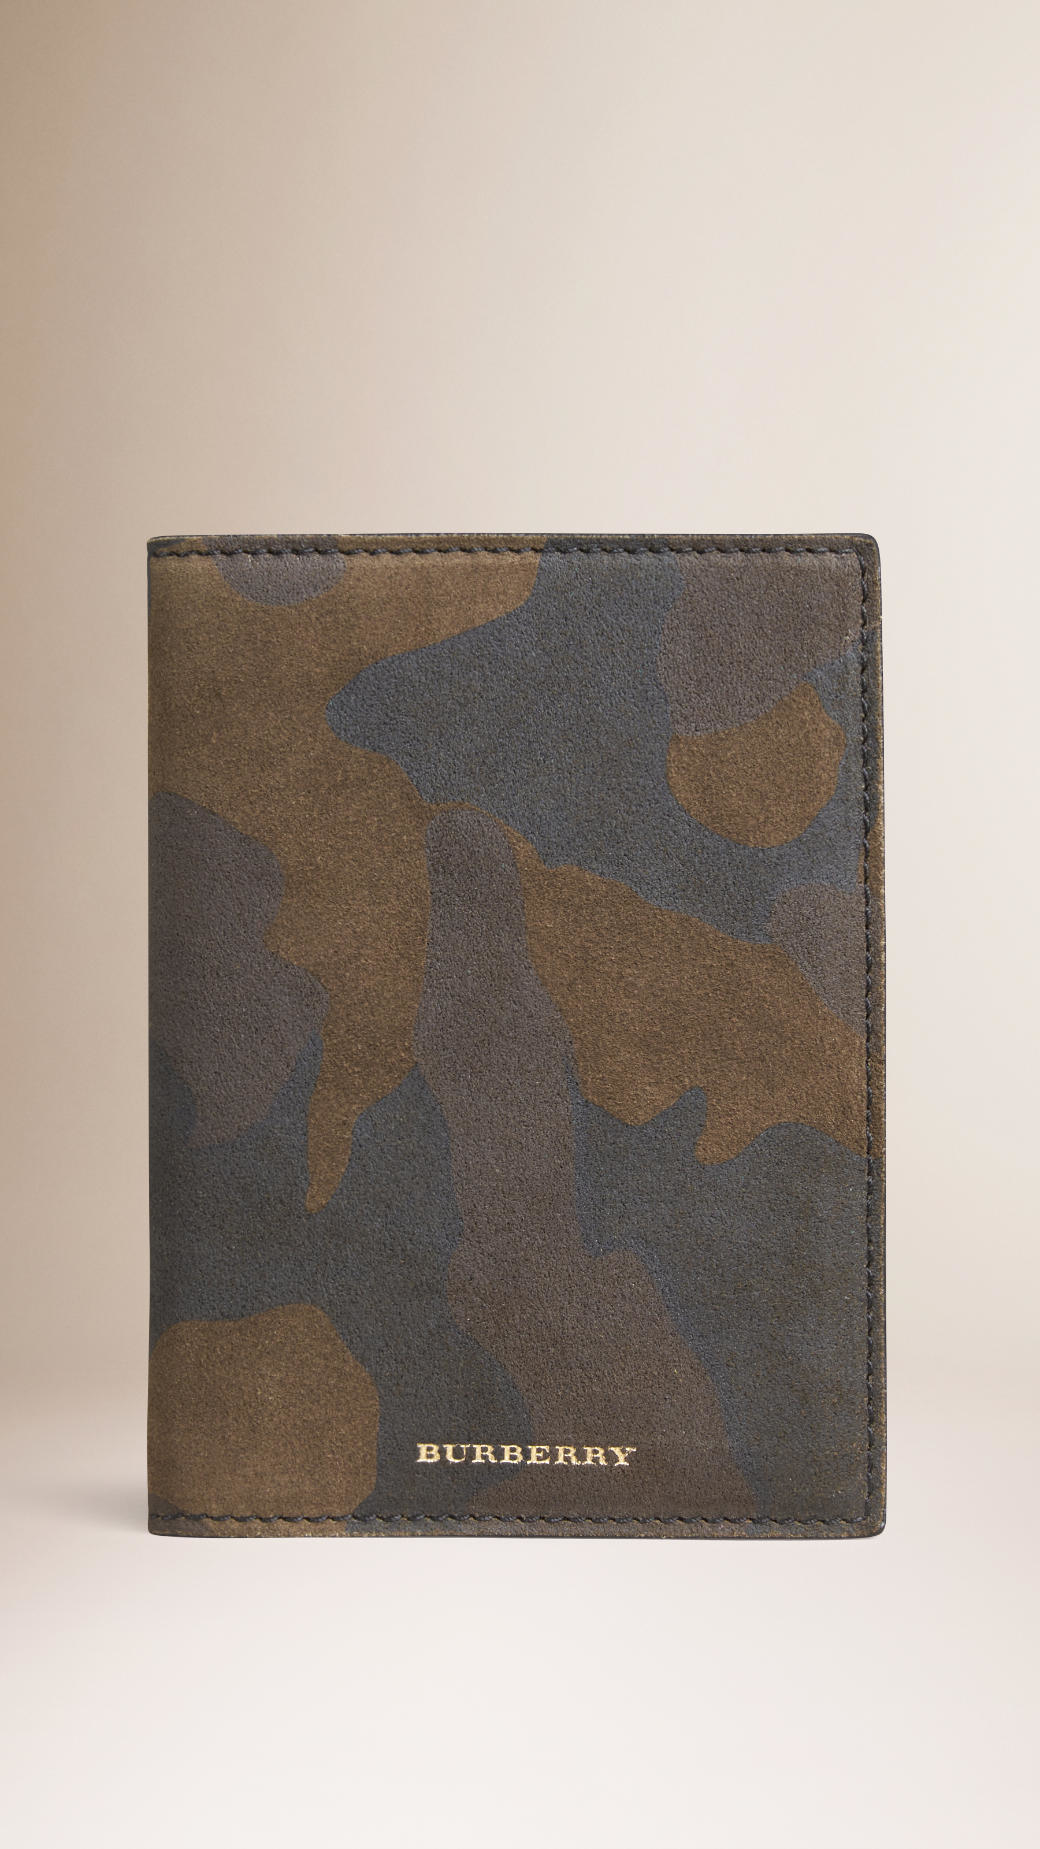 Burberry Camouflage Print Suede Passport Cover in Green for Men - Lyst